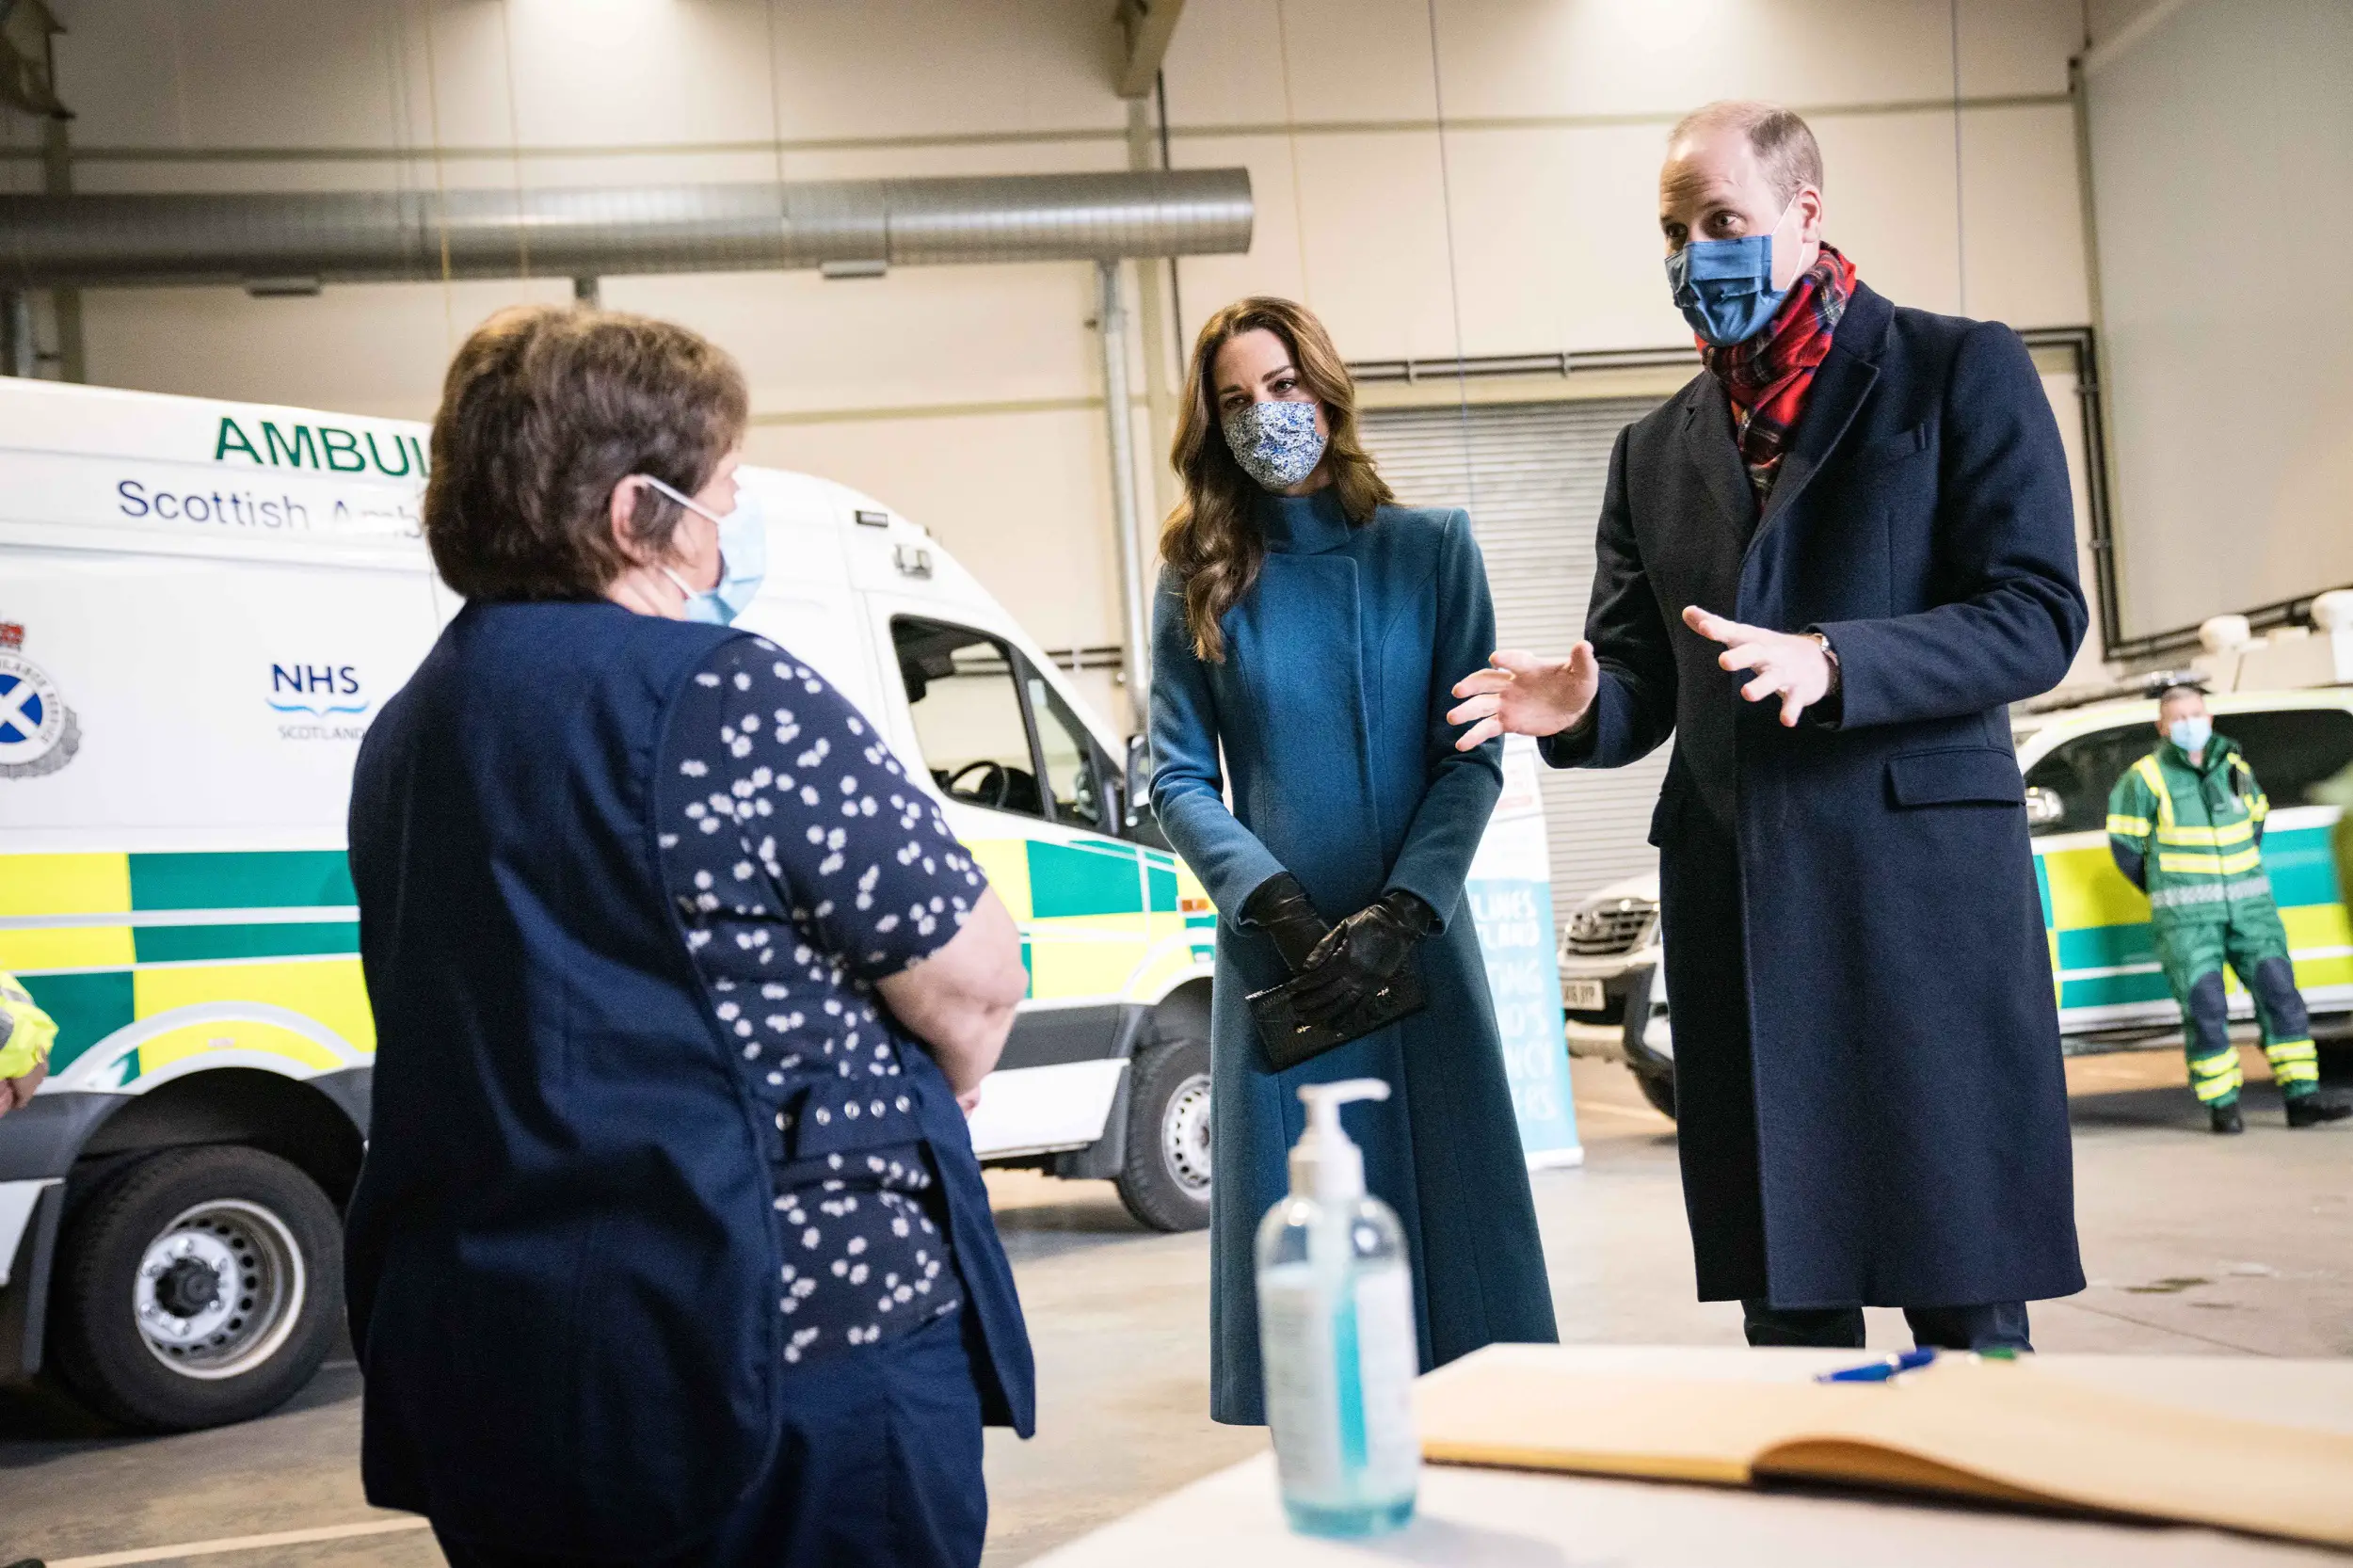 The Scottish Ambulance Service received some funding from NHS charities whose joint patron are The Duke and Duchess of Cambridge 